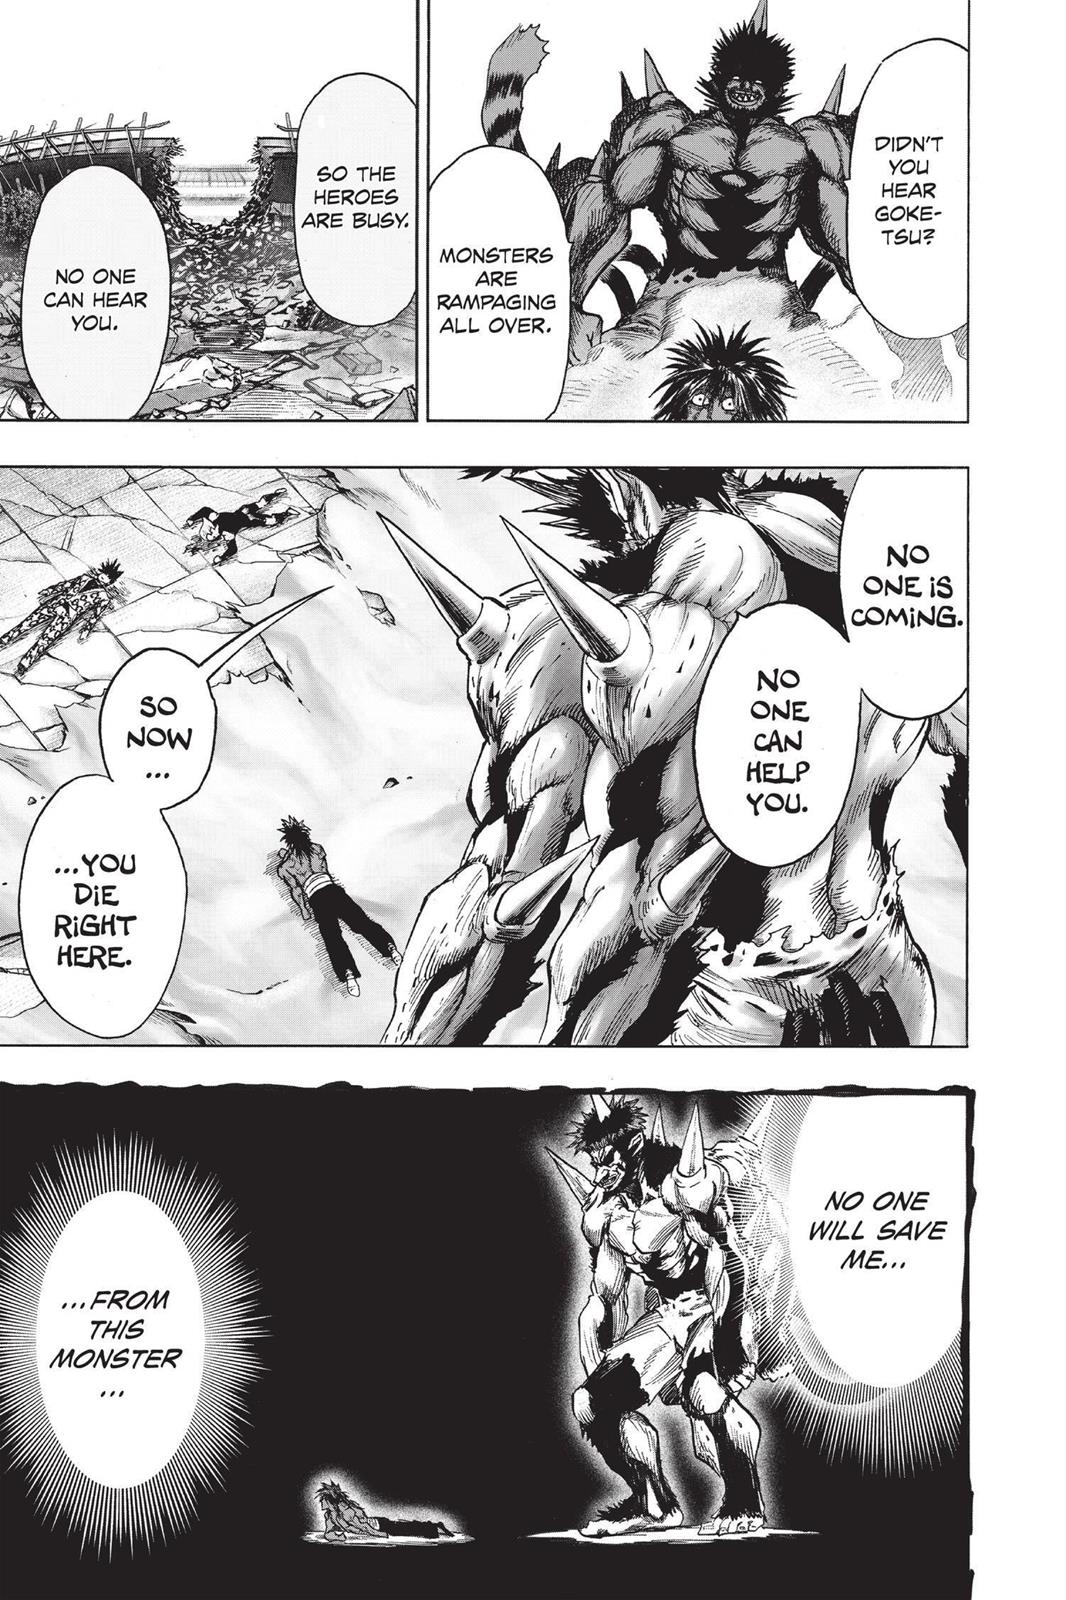 One-Punch Man, Punch 74 image 34